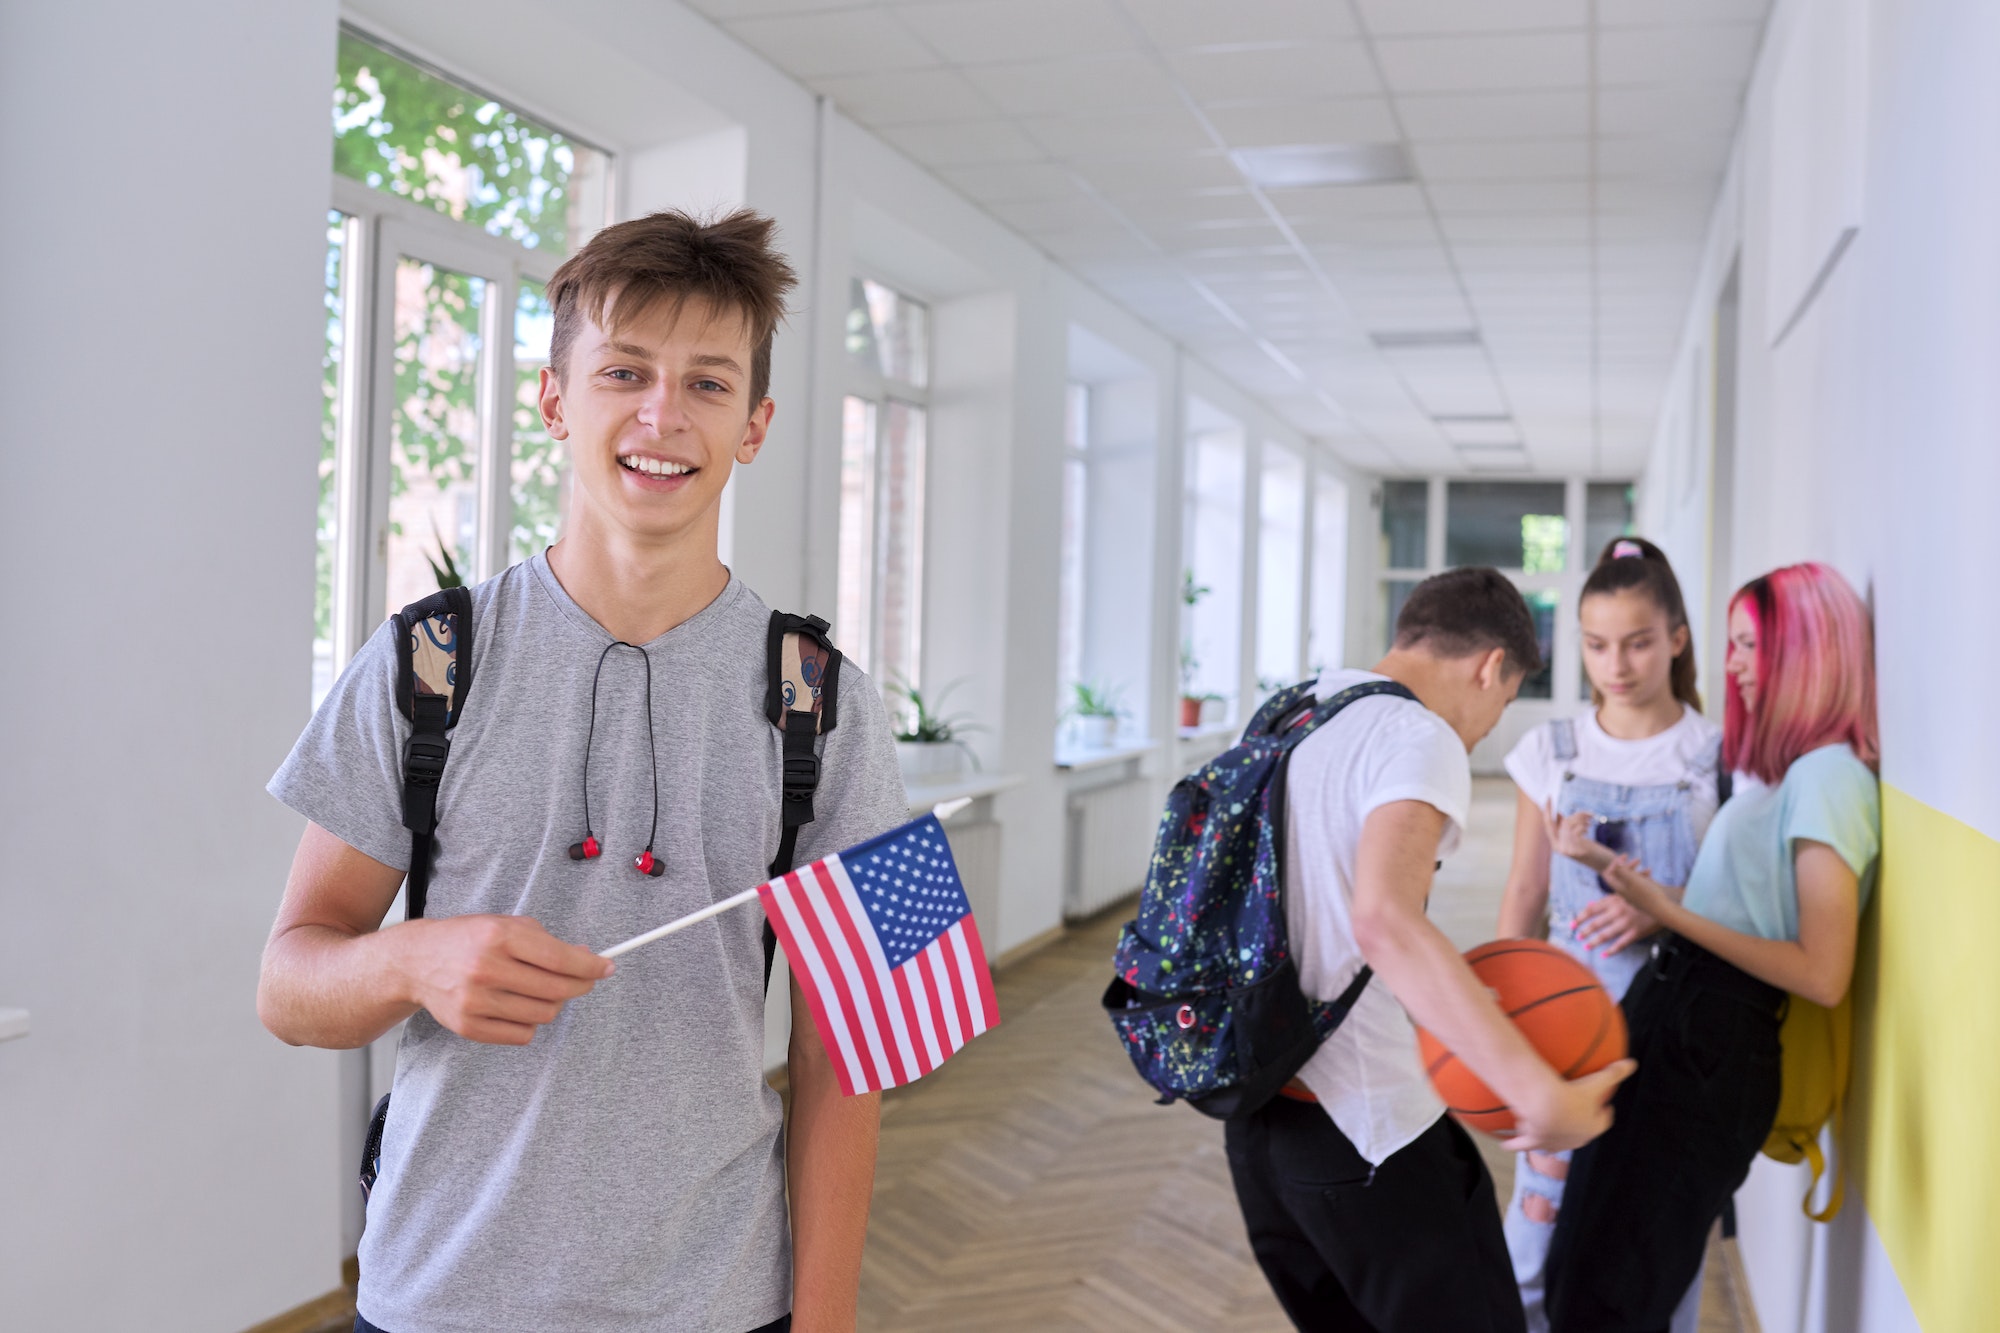 Male student teenager with USA flag inside college, group of students background